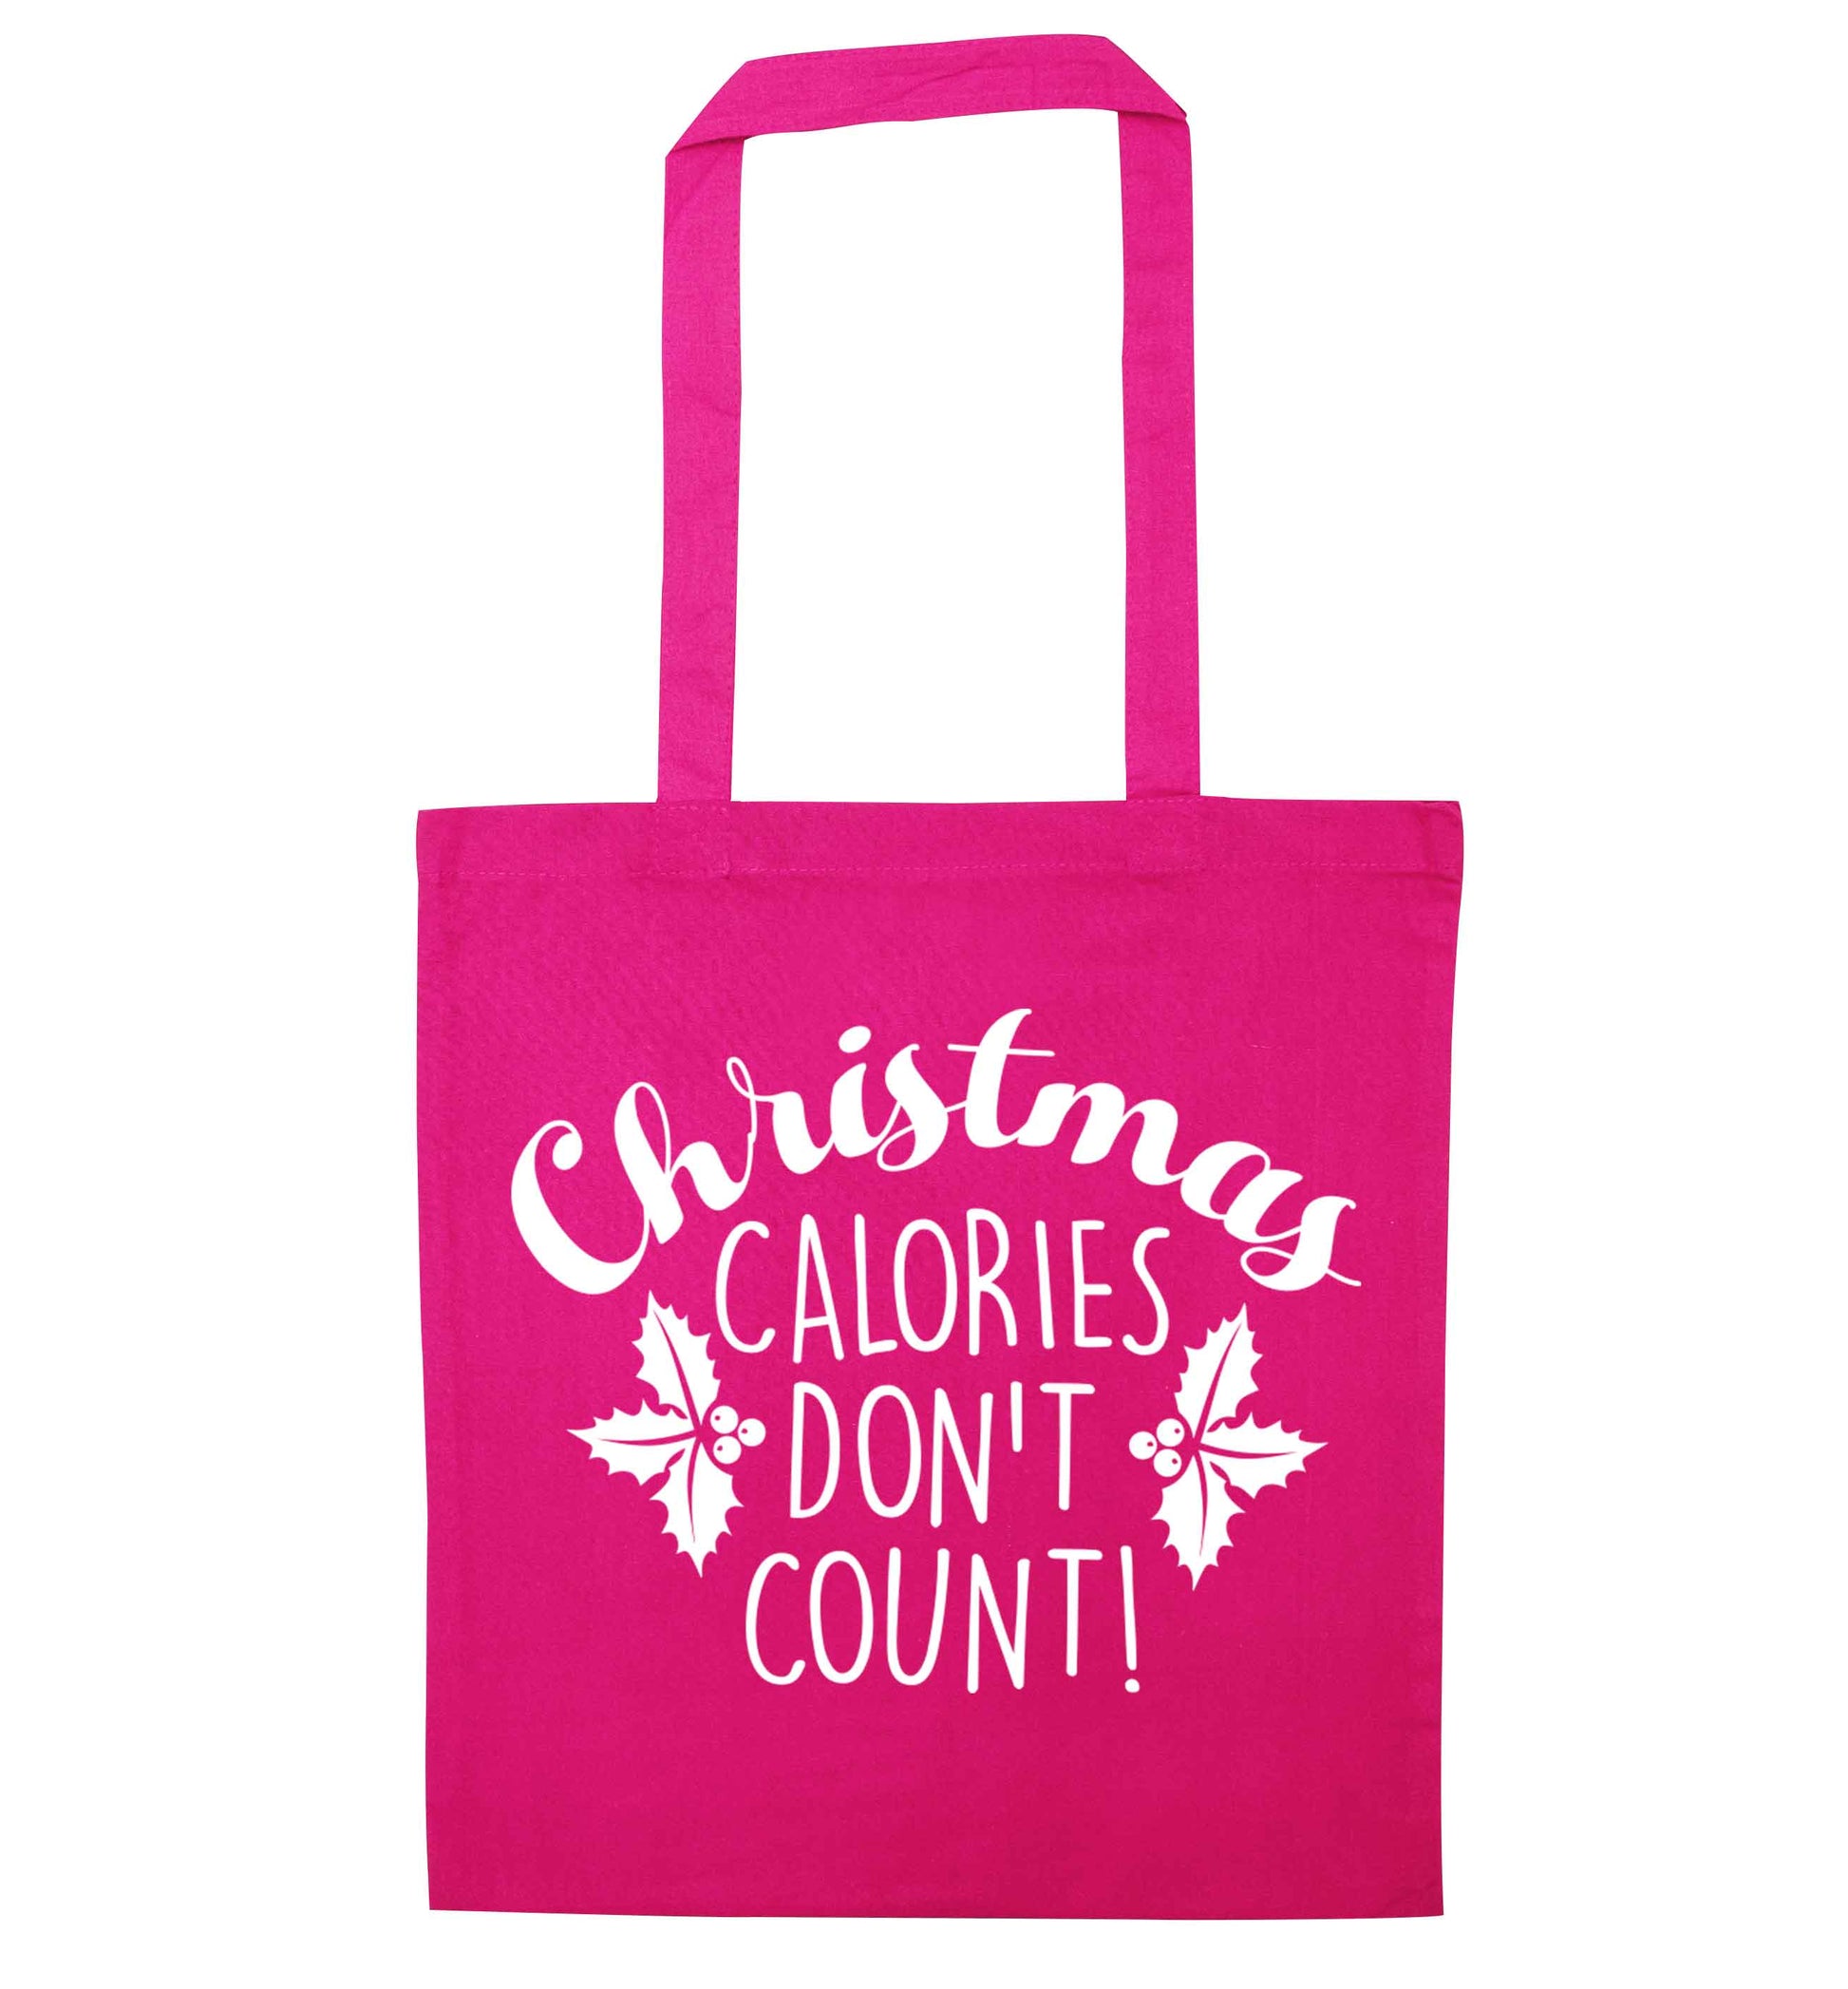 Christmas calories don't count pink tote bag